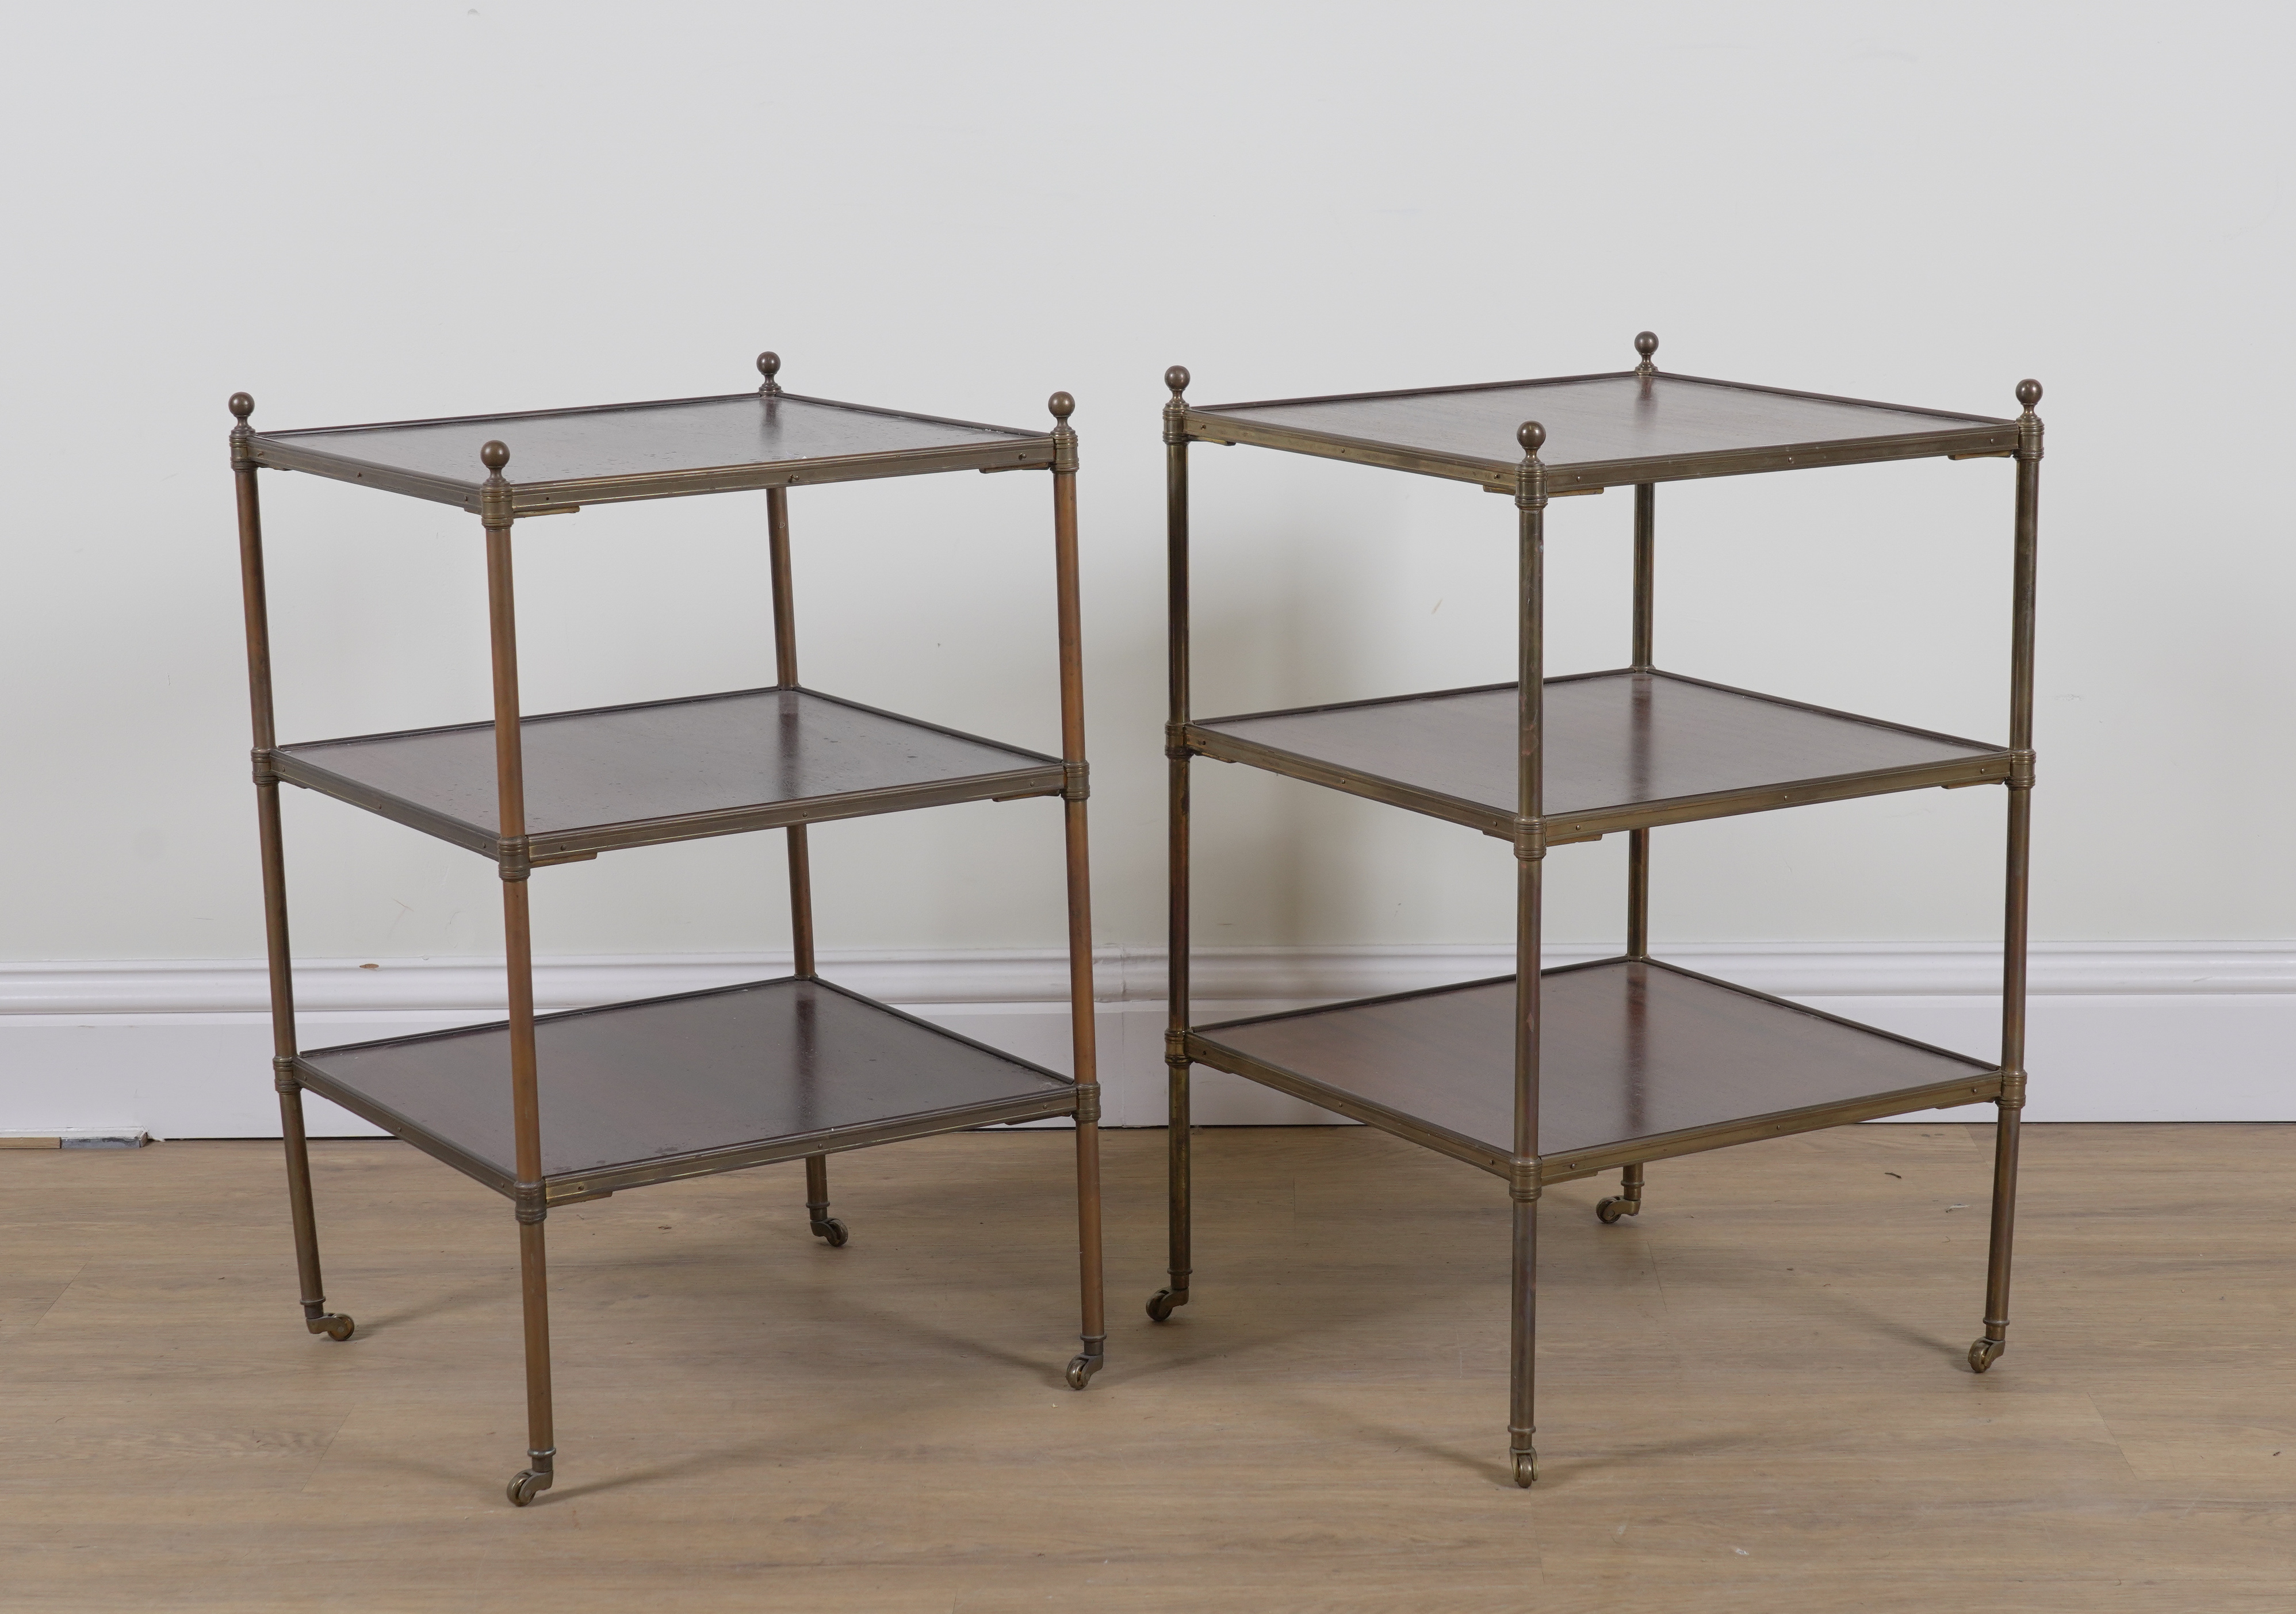 A PAIR OF MID 20TH CENTURY LACQUERED BRASS AND MAHOGANY SQUARE THREE TIER ETAGERES (2)